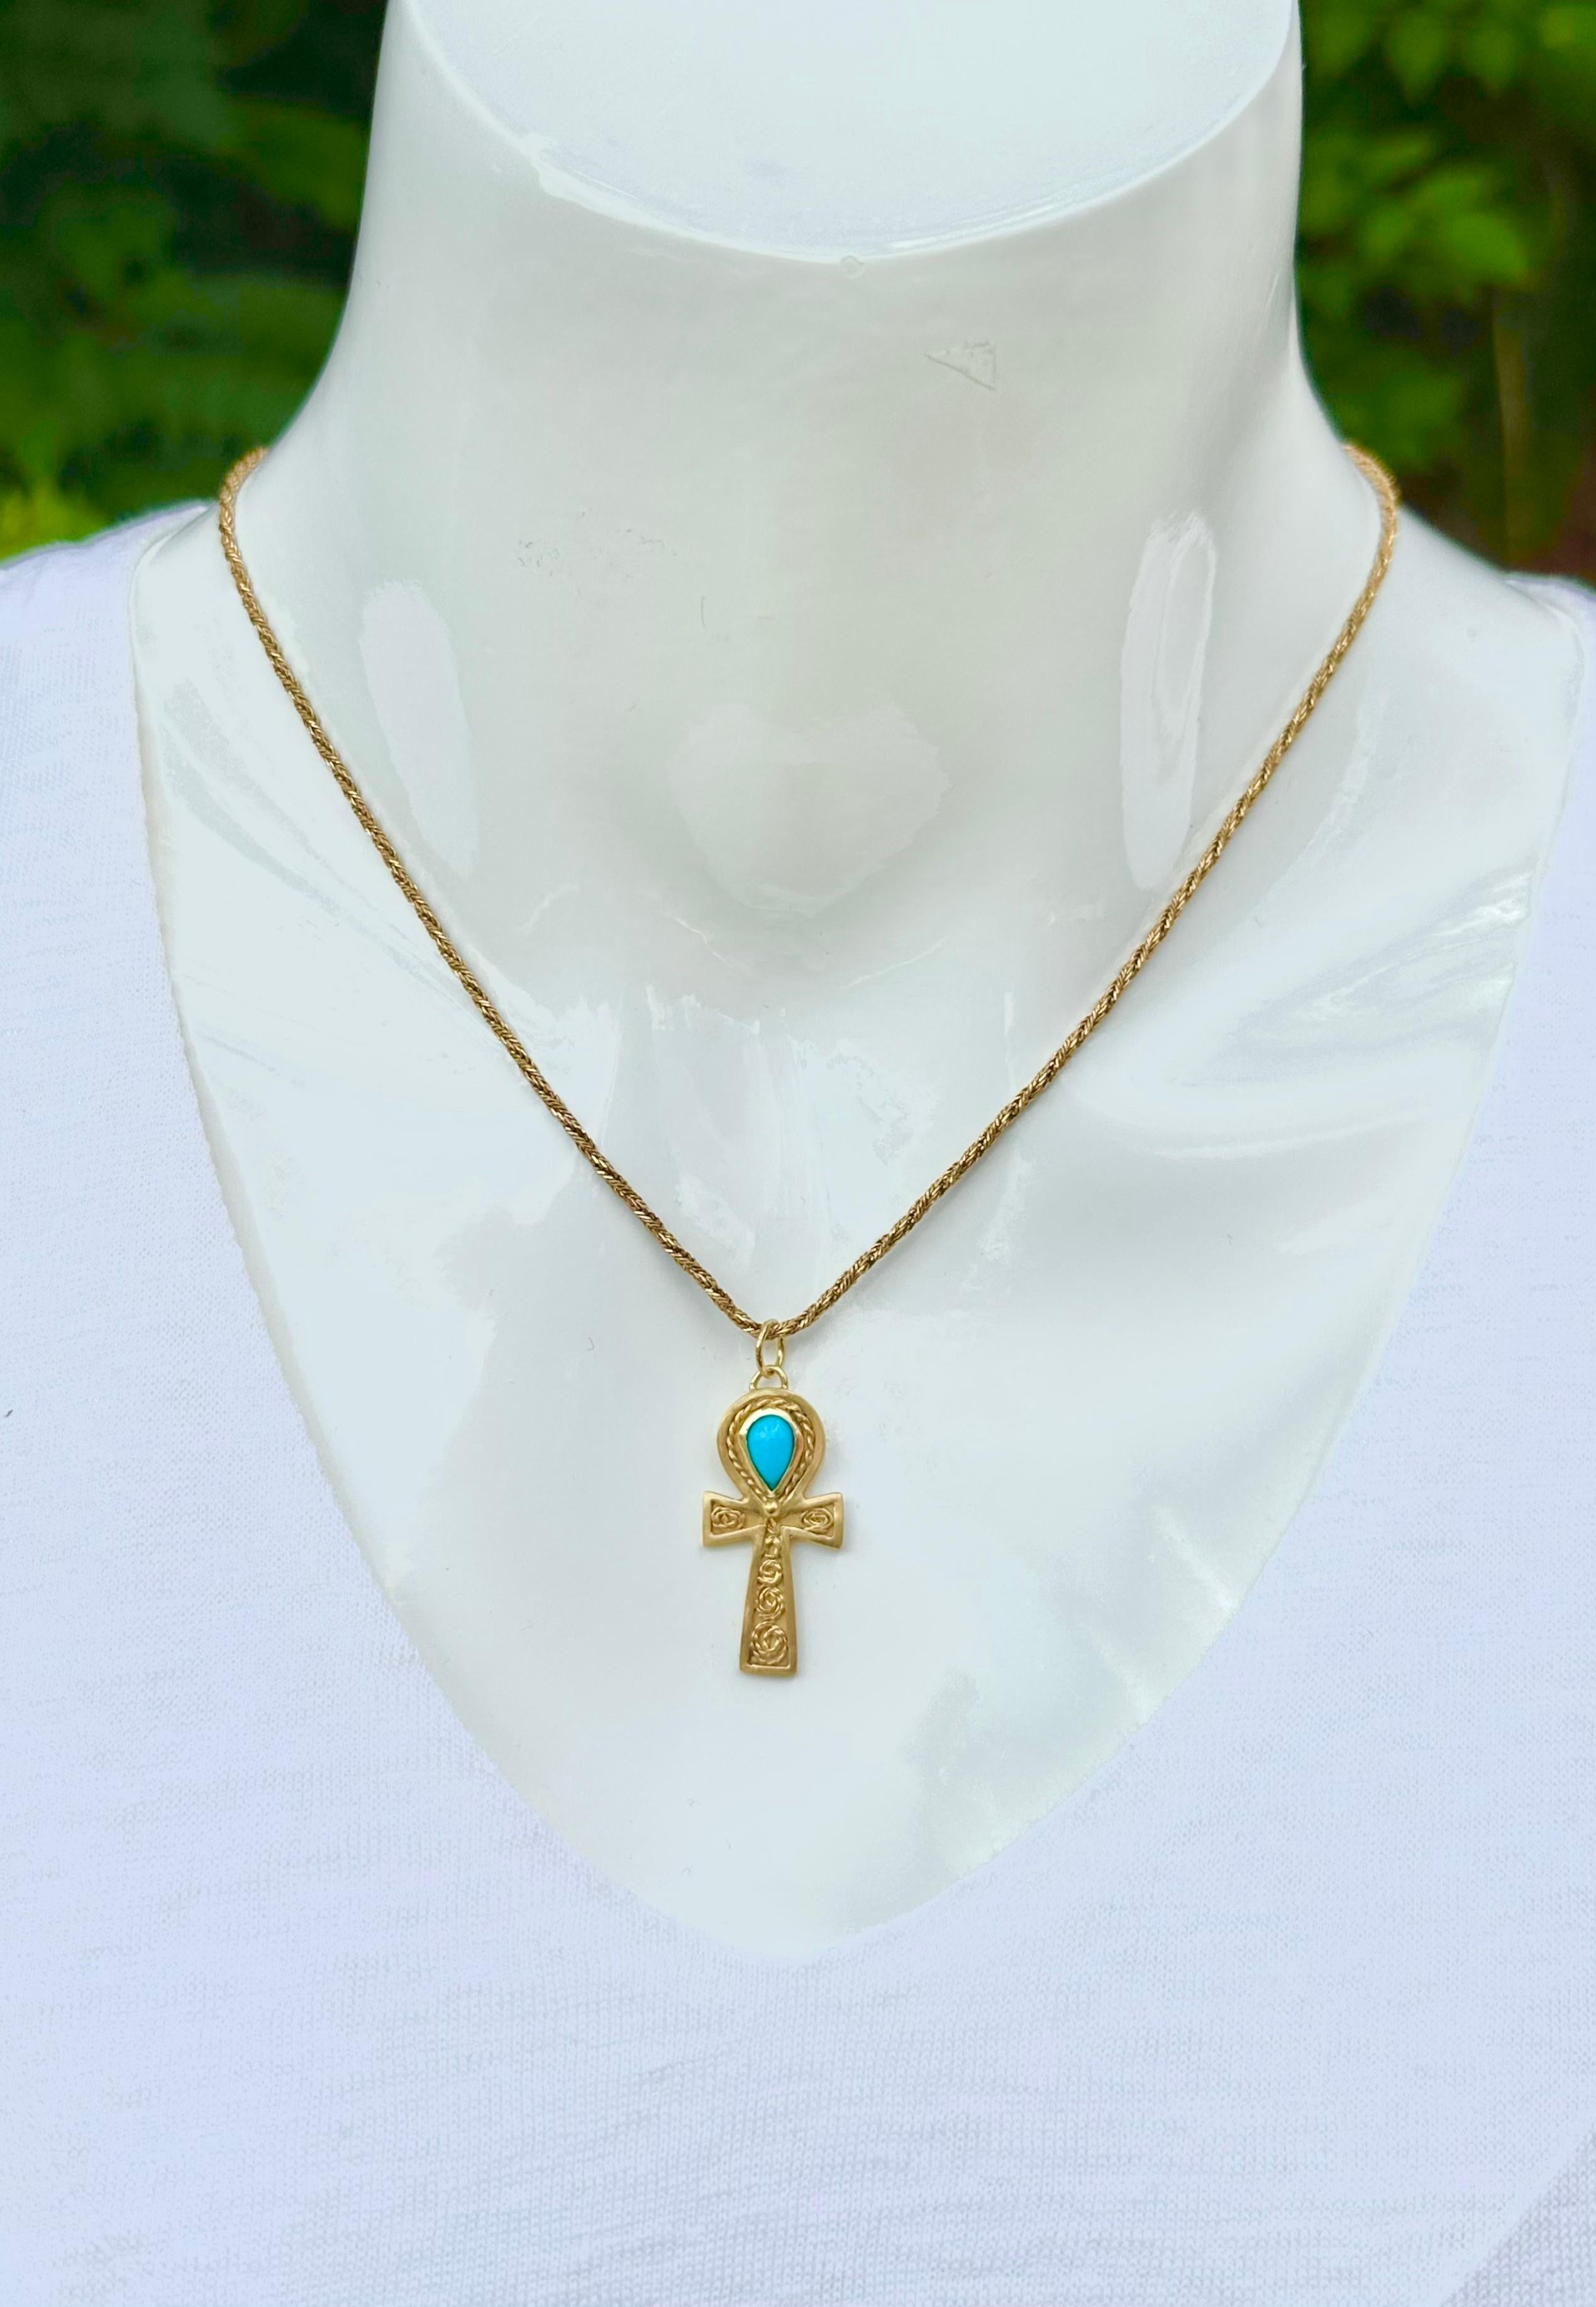 Sleeping Beauty Ankh Pendant In New Condition For Sale In Plano, TX